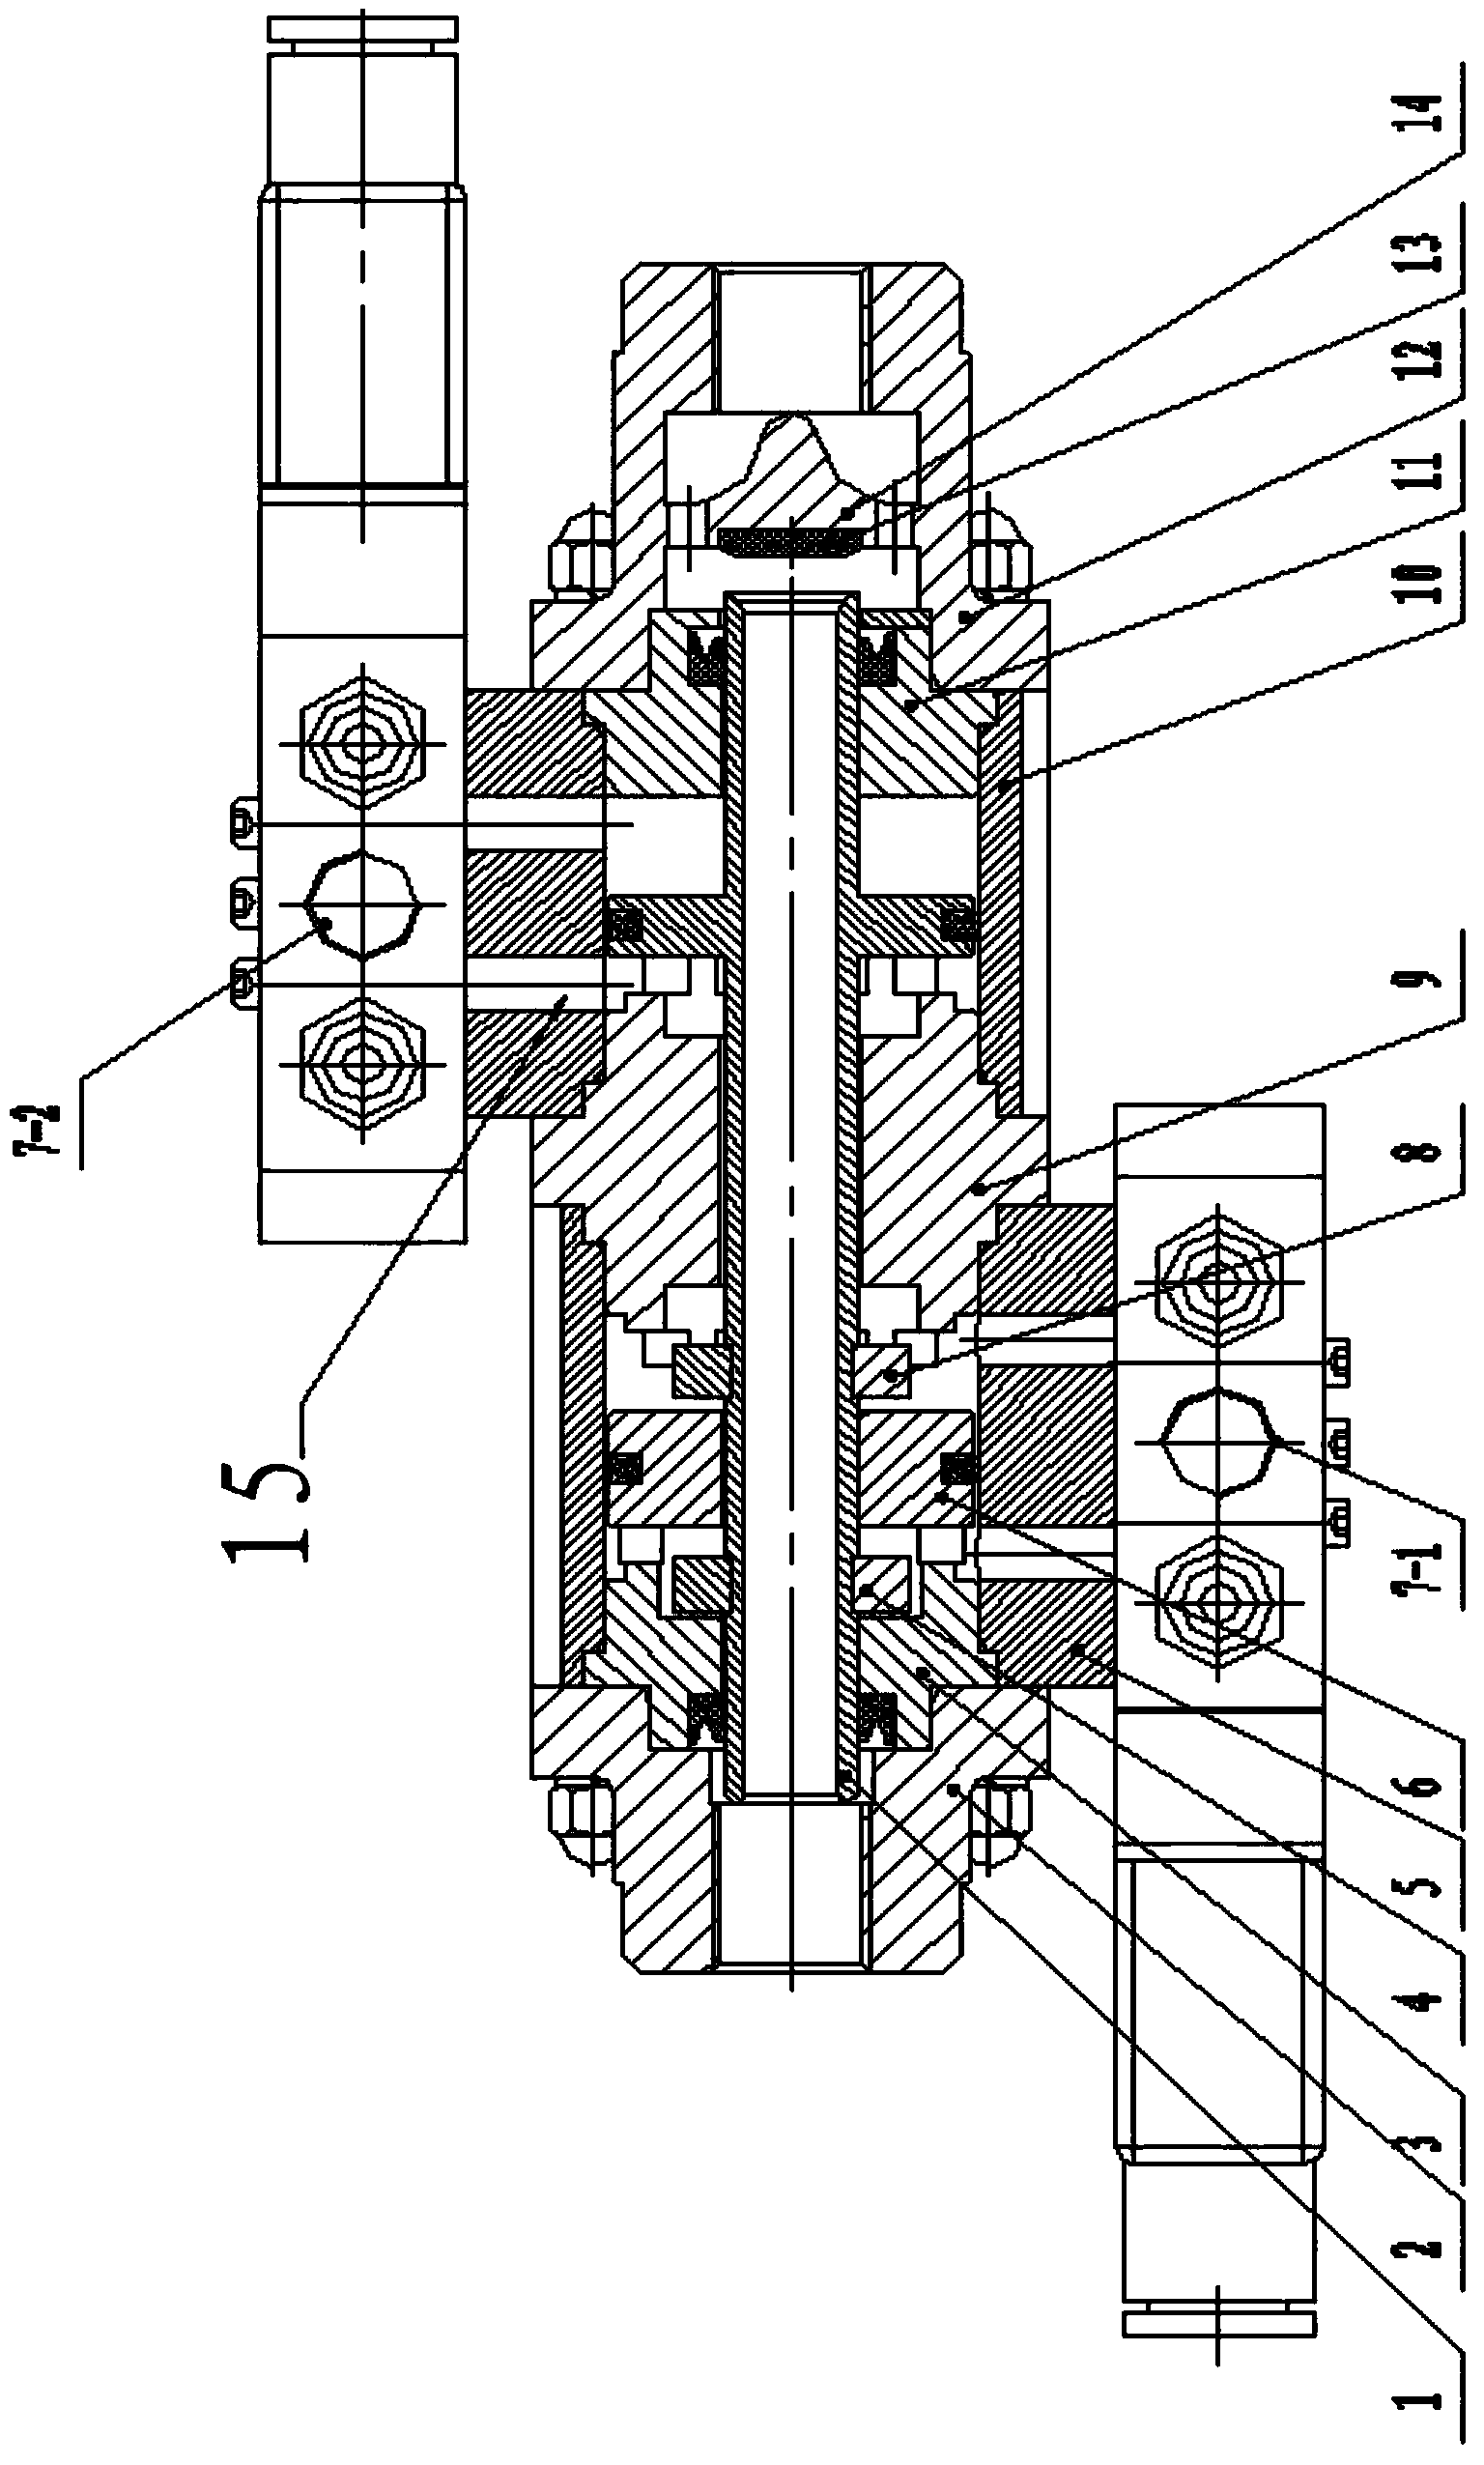 Two-stage buffer type anti-water-hammer coaxial valve